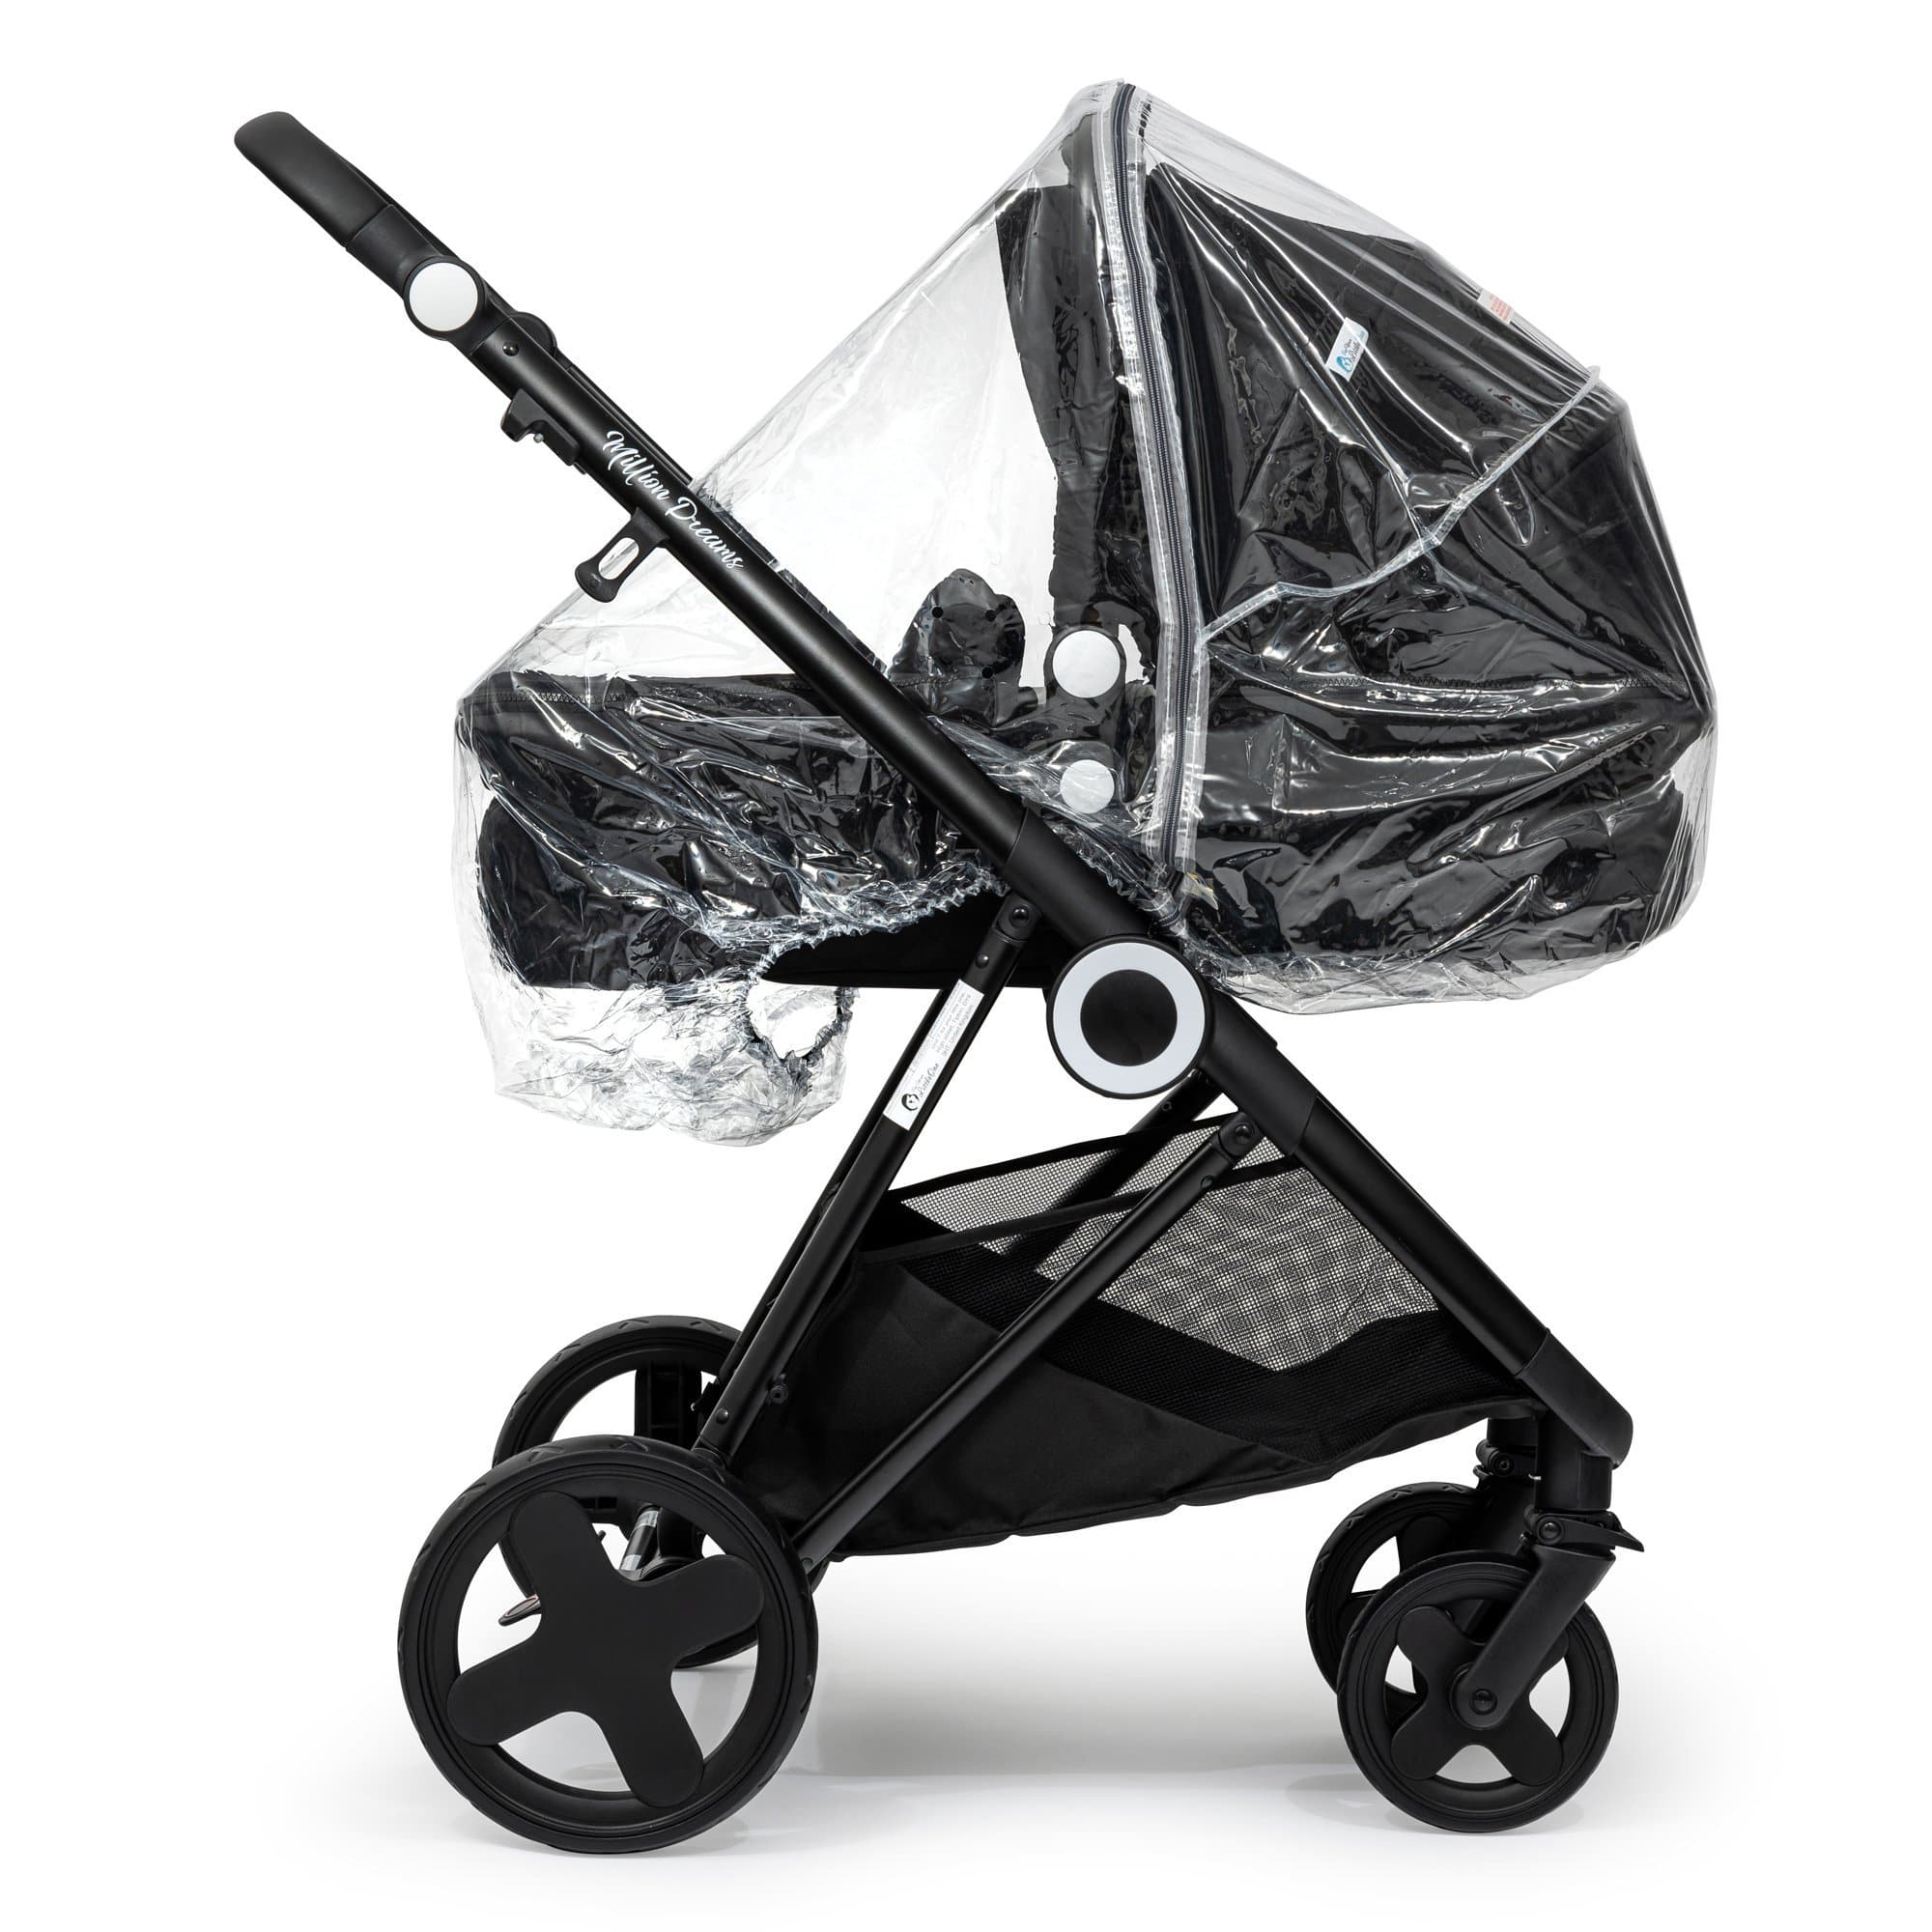 2 in 1 Rain Cover Compatible with Hartan - Fits All Models - For Your Little One